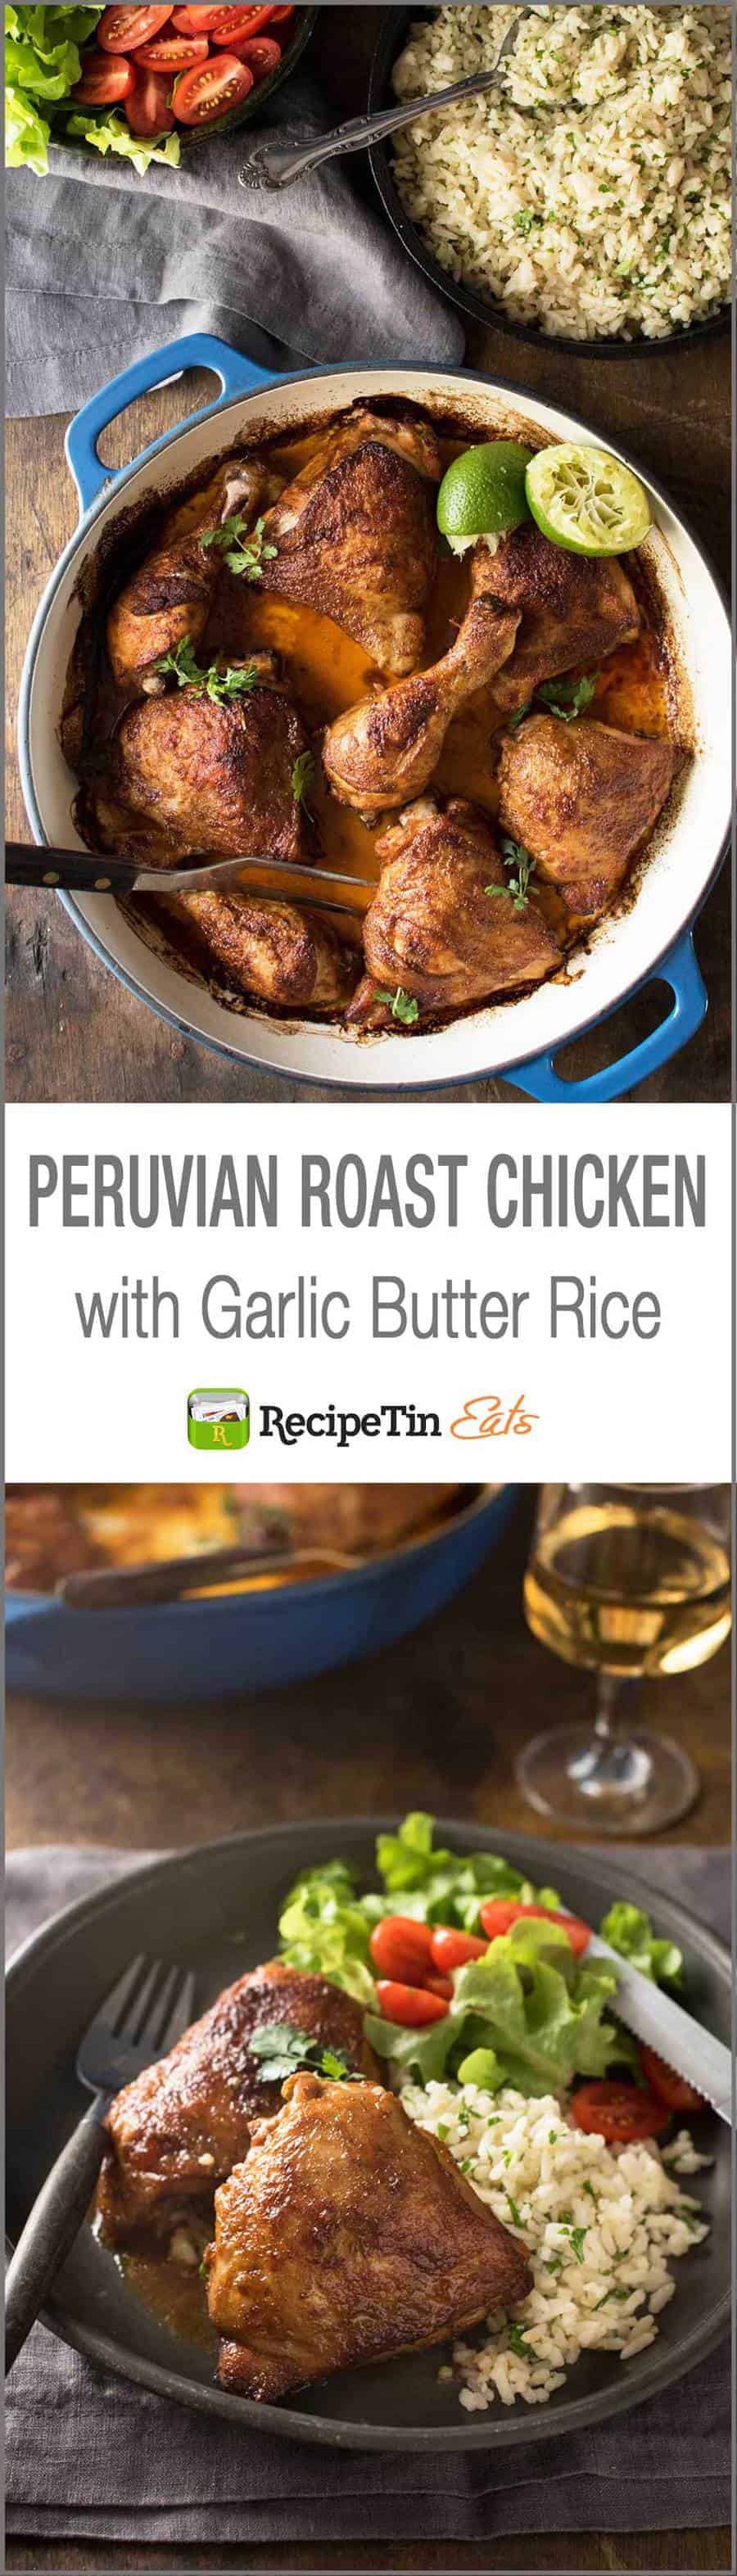 Peruvian Roast Chicken - the marinade is simple but packs a flavour punch! And the rice is absolutely irresistible!